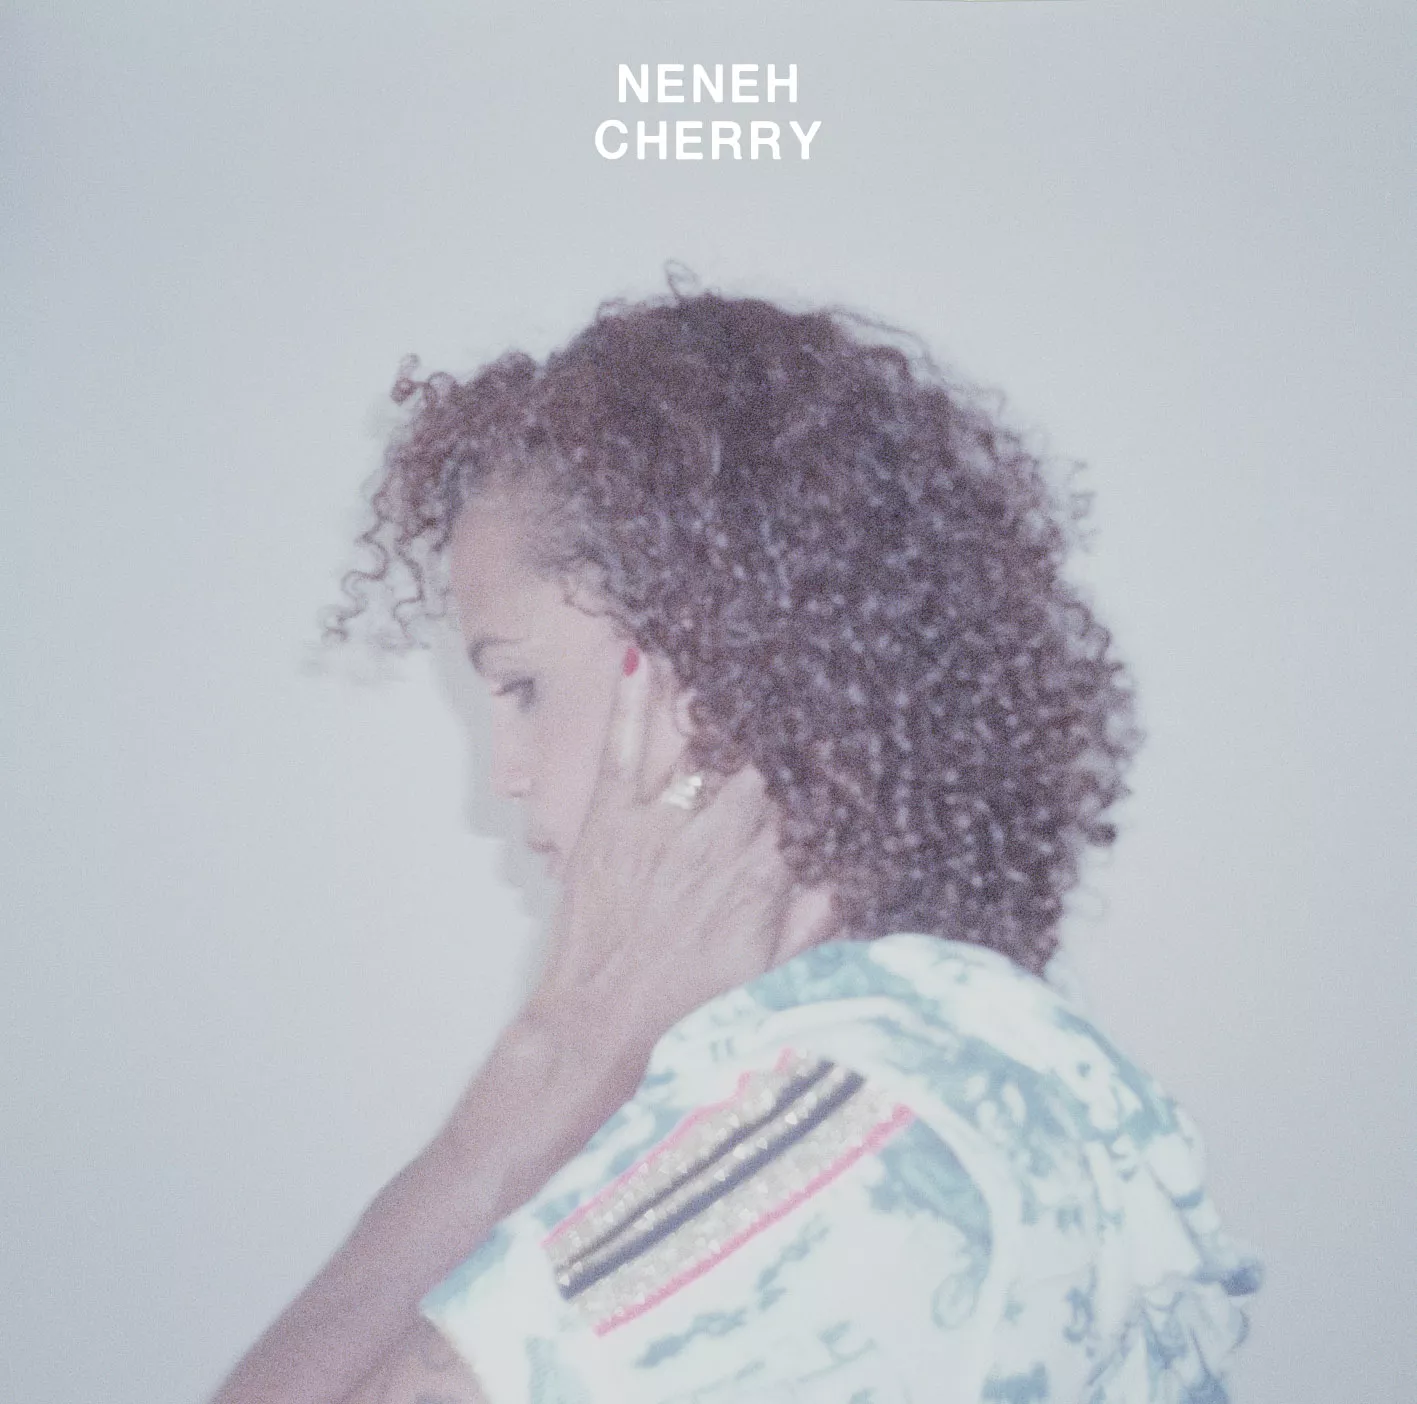 The Blank Project - Neneh Cherry